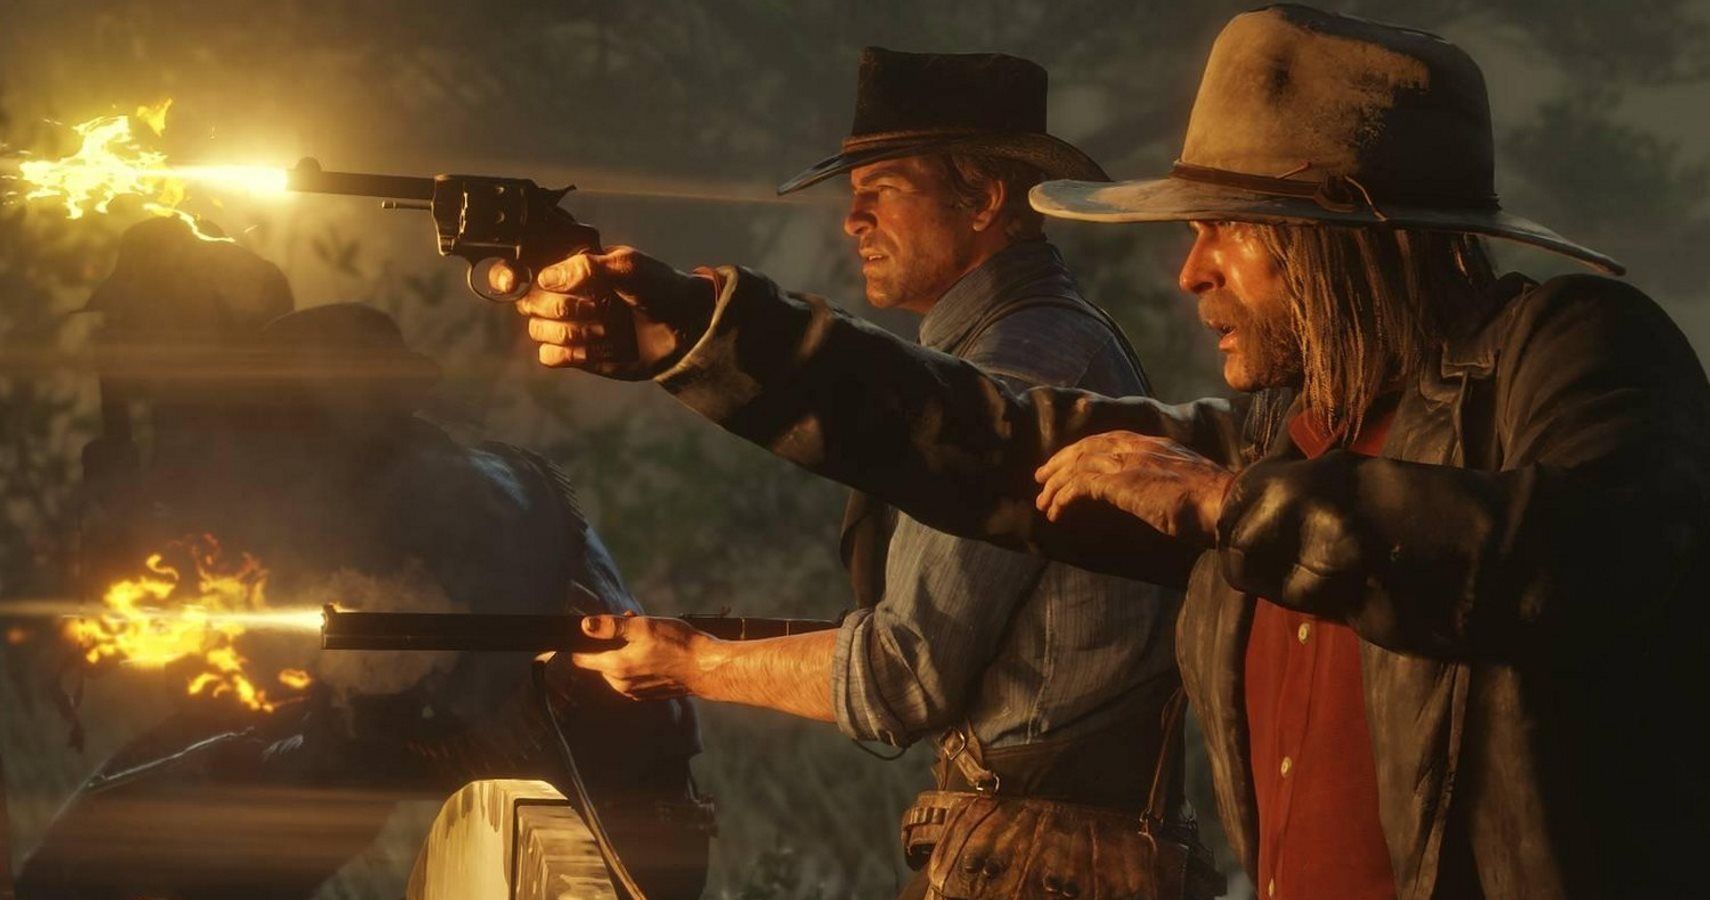 Local, Independent Game Stores Won't Be Getting Copies Of Red Dead Redemption 2 Before Release Date